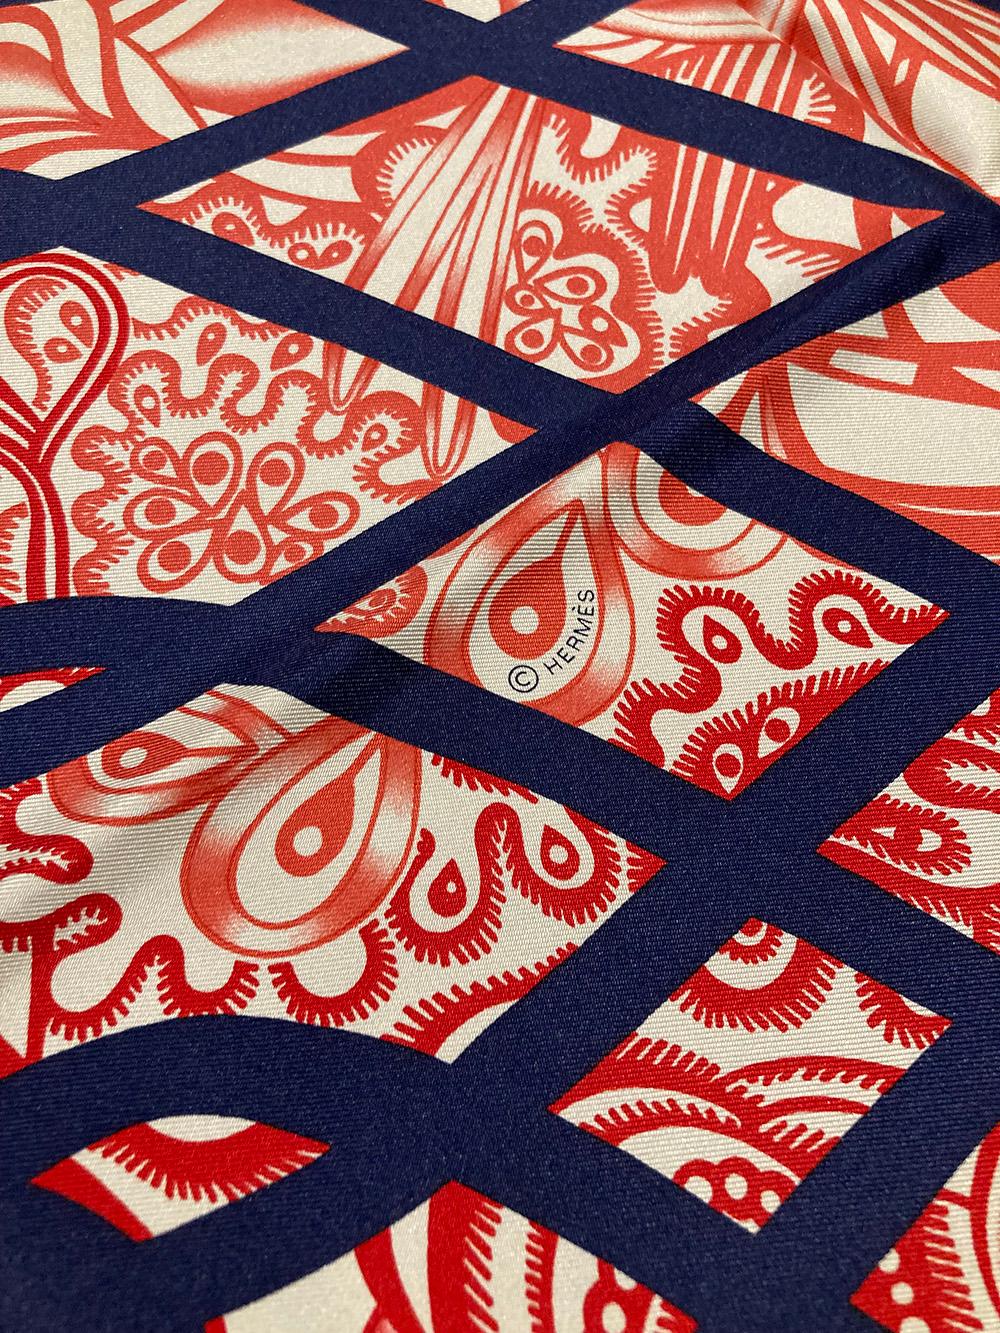 NWT Hermes Reverie Solitaire Silk Scarf in new unused condition. Silk screen design c2019 by Florence Manlik no longer available online. Red orange and pink abstract illustrated print with navy wavy line pattern over main design. Solid navy border